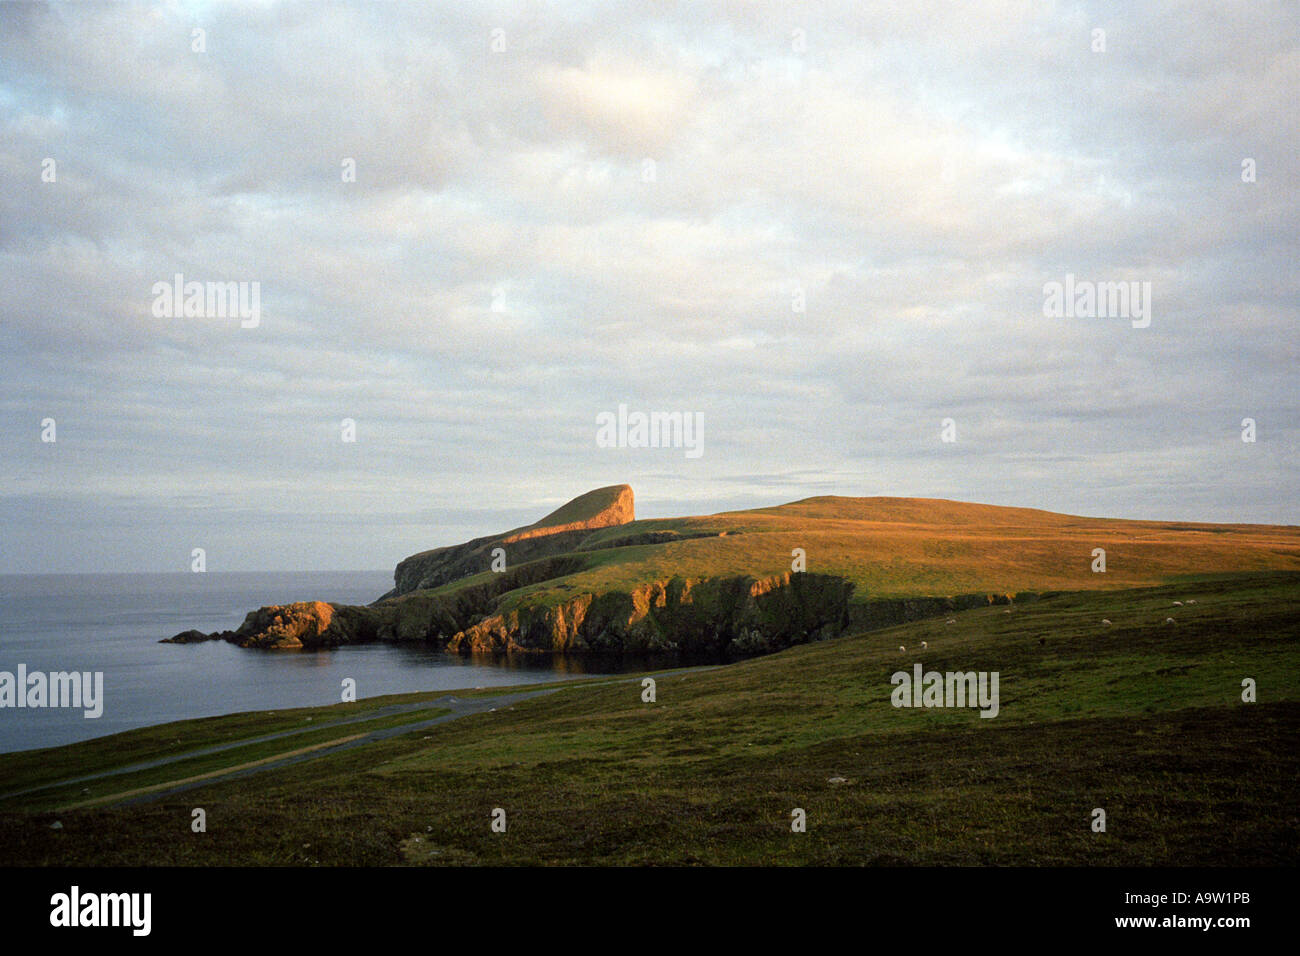 The view towards 'sheep rock' accross the North shore of Fair Isle off Northern Scotland Stock Photo